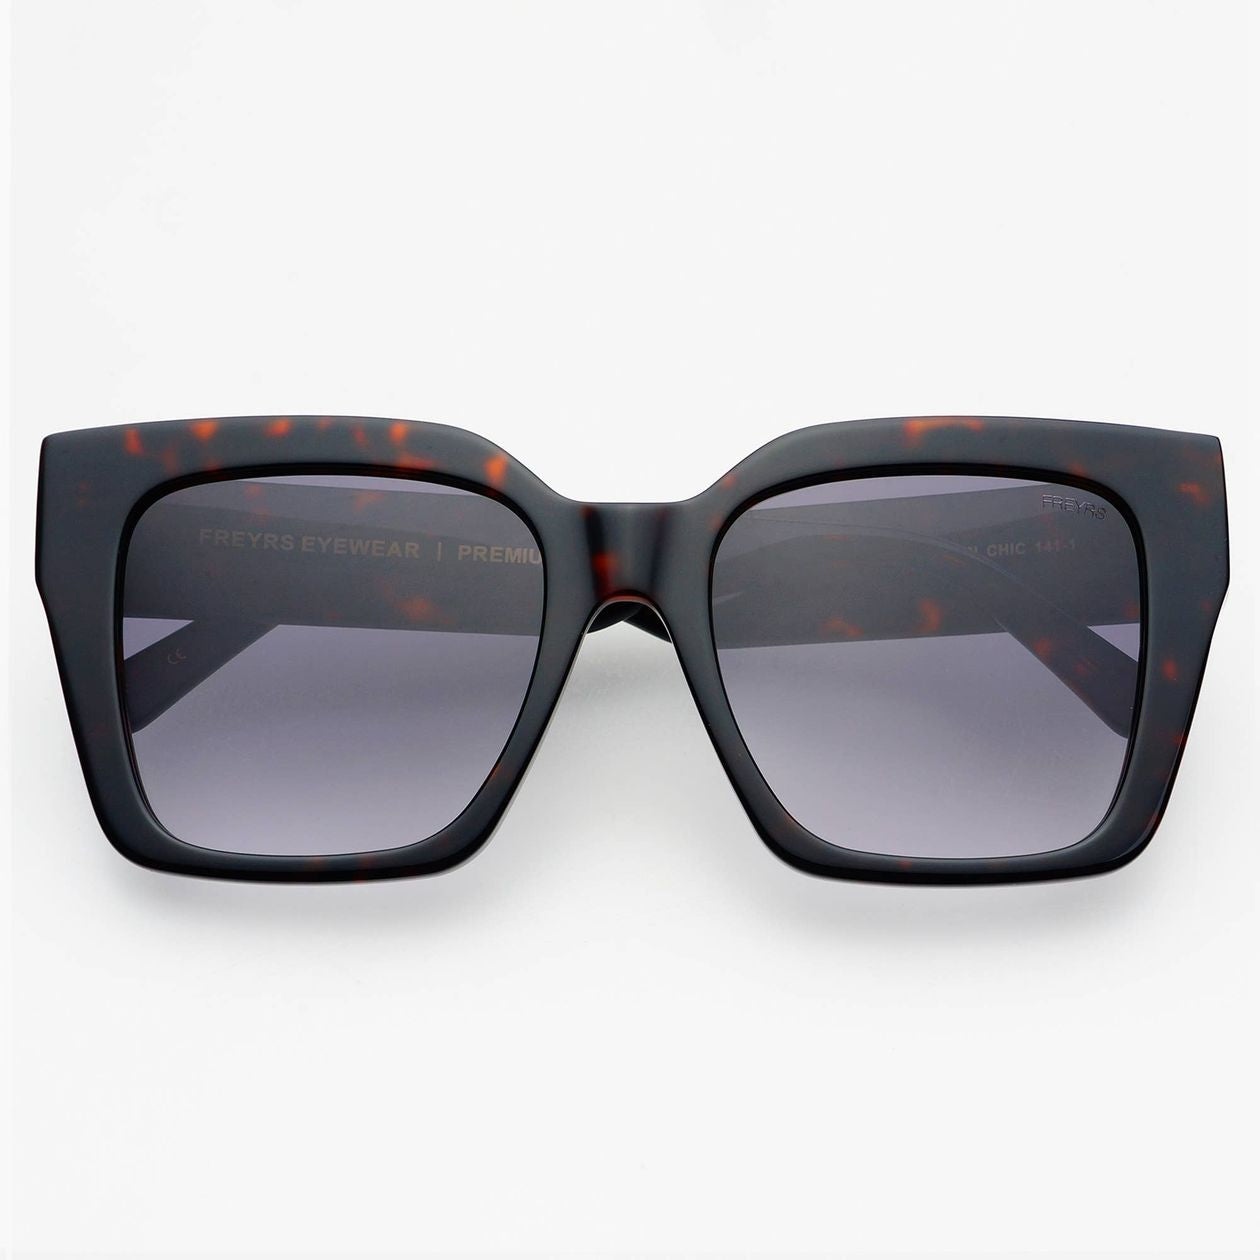 Bon Chic Oversized Square Sunglasses-260 Other Accessories-FREYRS EYEWEAR-Coastal Bloom Boutique, find the trendiest versions of the popular styles and looks Located in Indialantic, FL